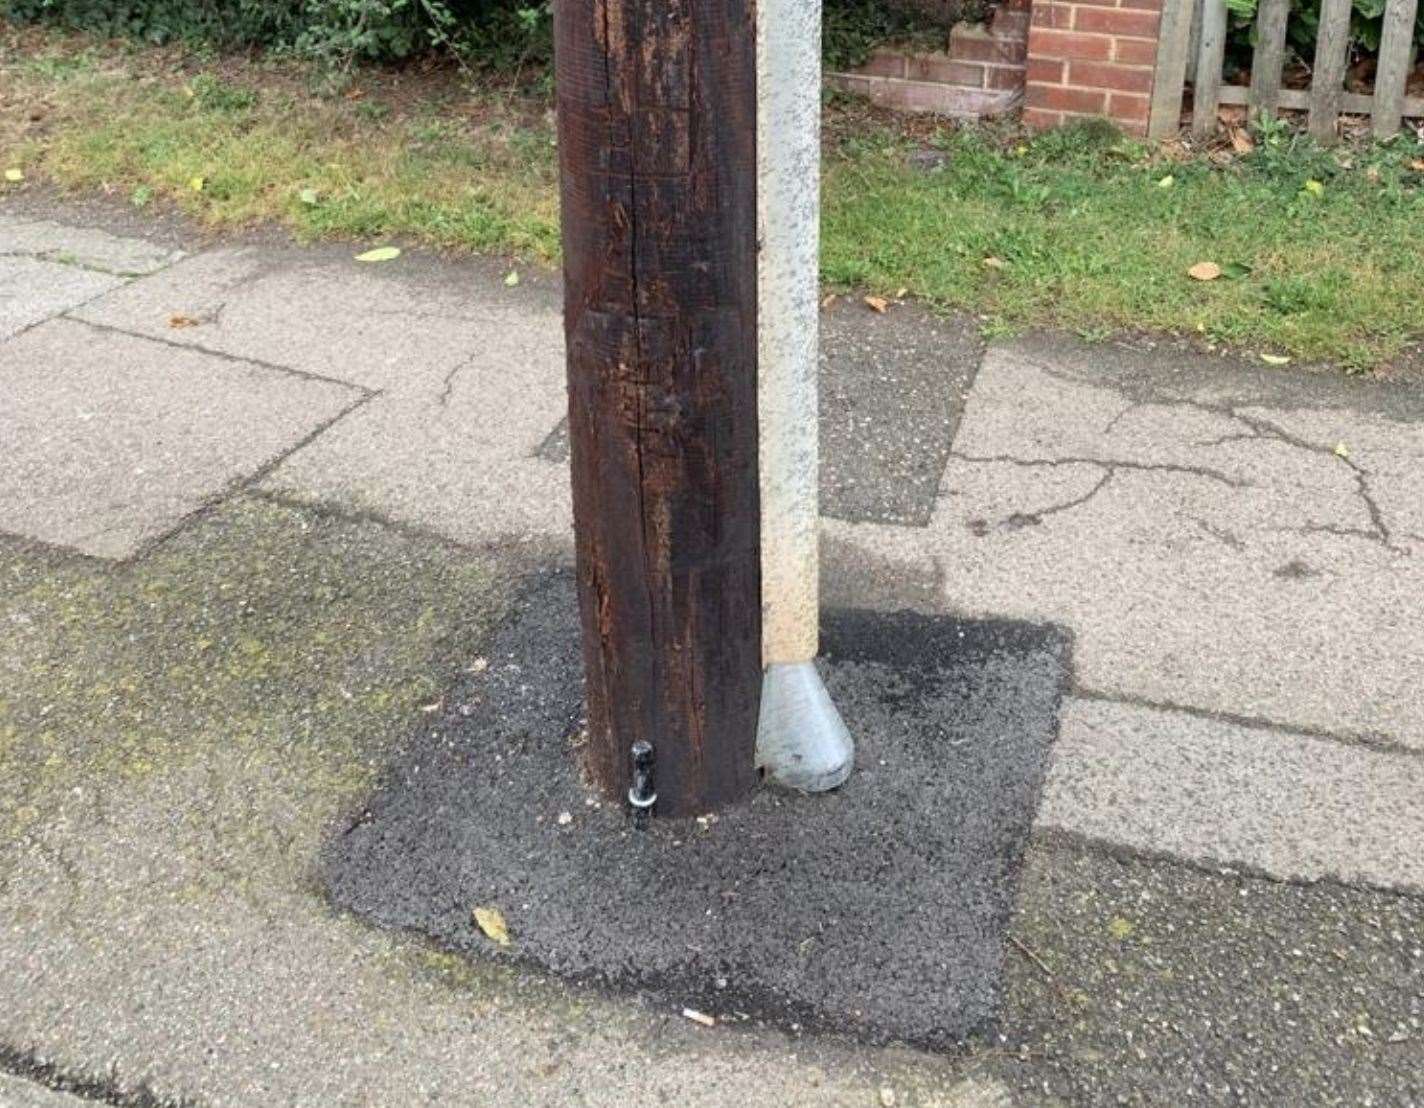 This BT/Openreach telegraph pole installed in August has led to disgusting plumbing problems for Whitstable resident Steve Tragner